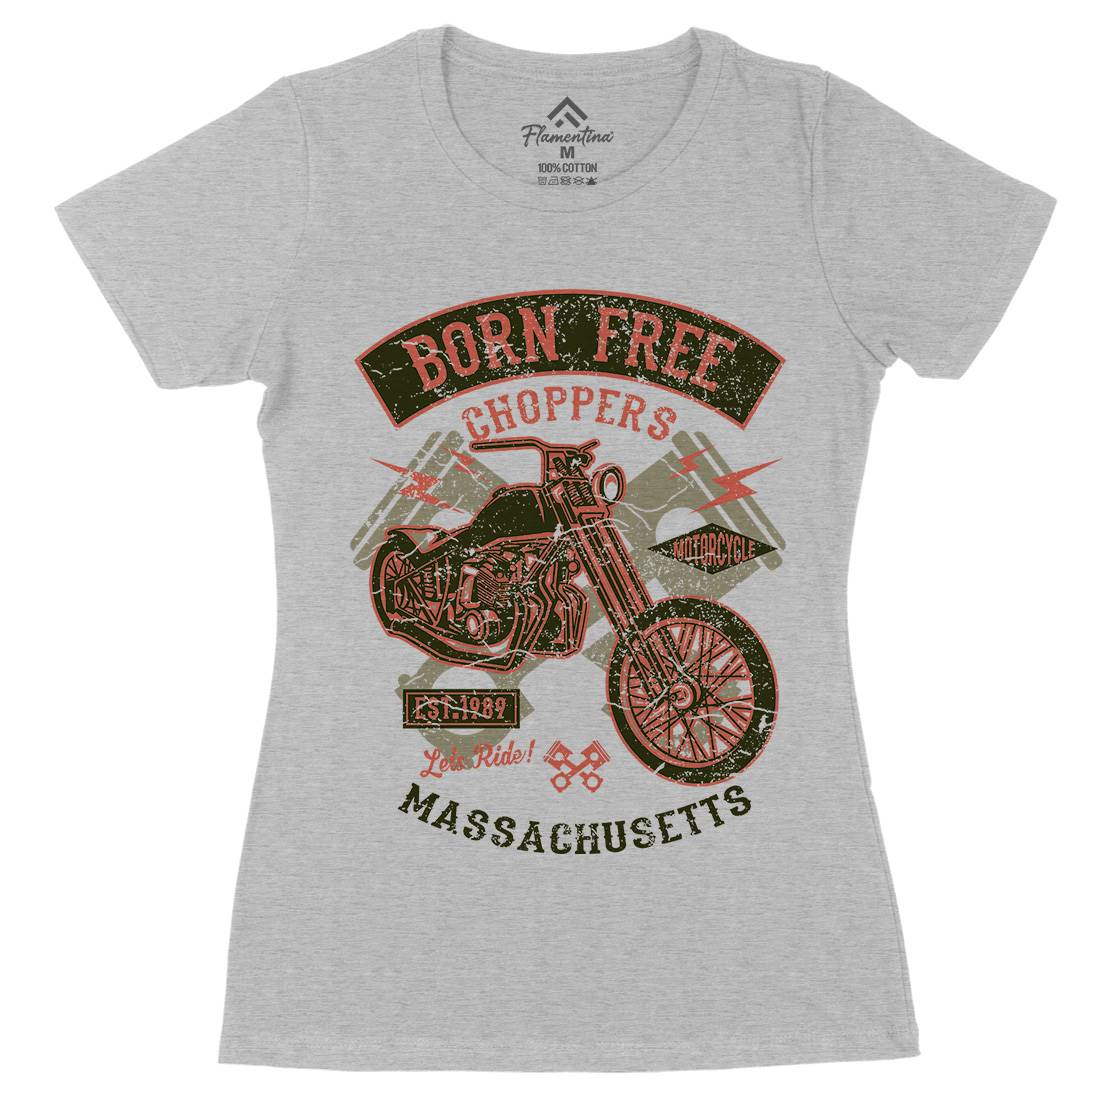 Born Free Choppers Womens Organic Crew Neck T-Shirt Motorcycles A018